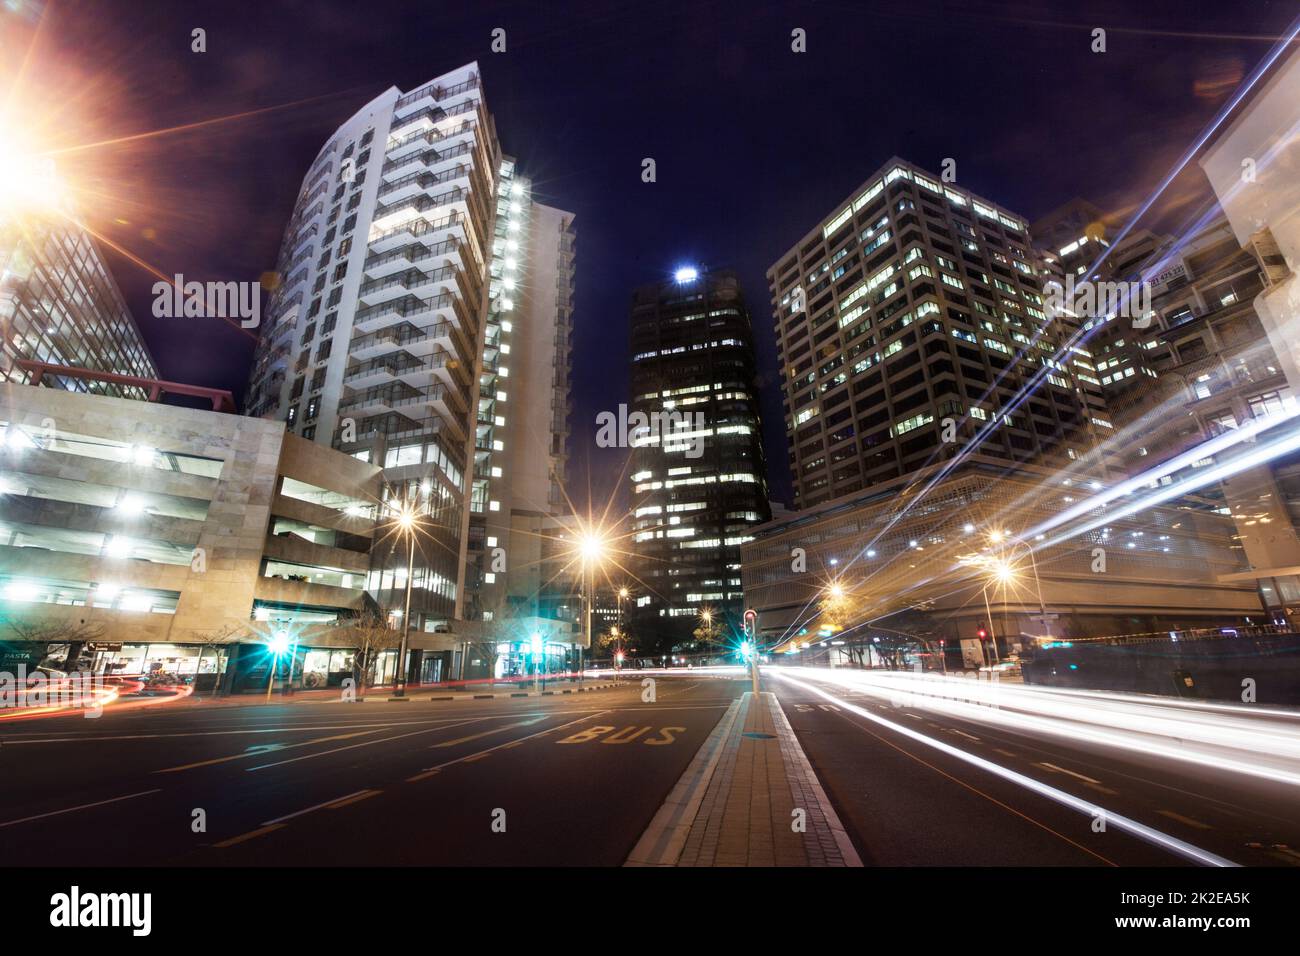 The hustle and bustle of a busy street. A city scene at night. Stock Photo